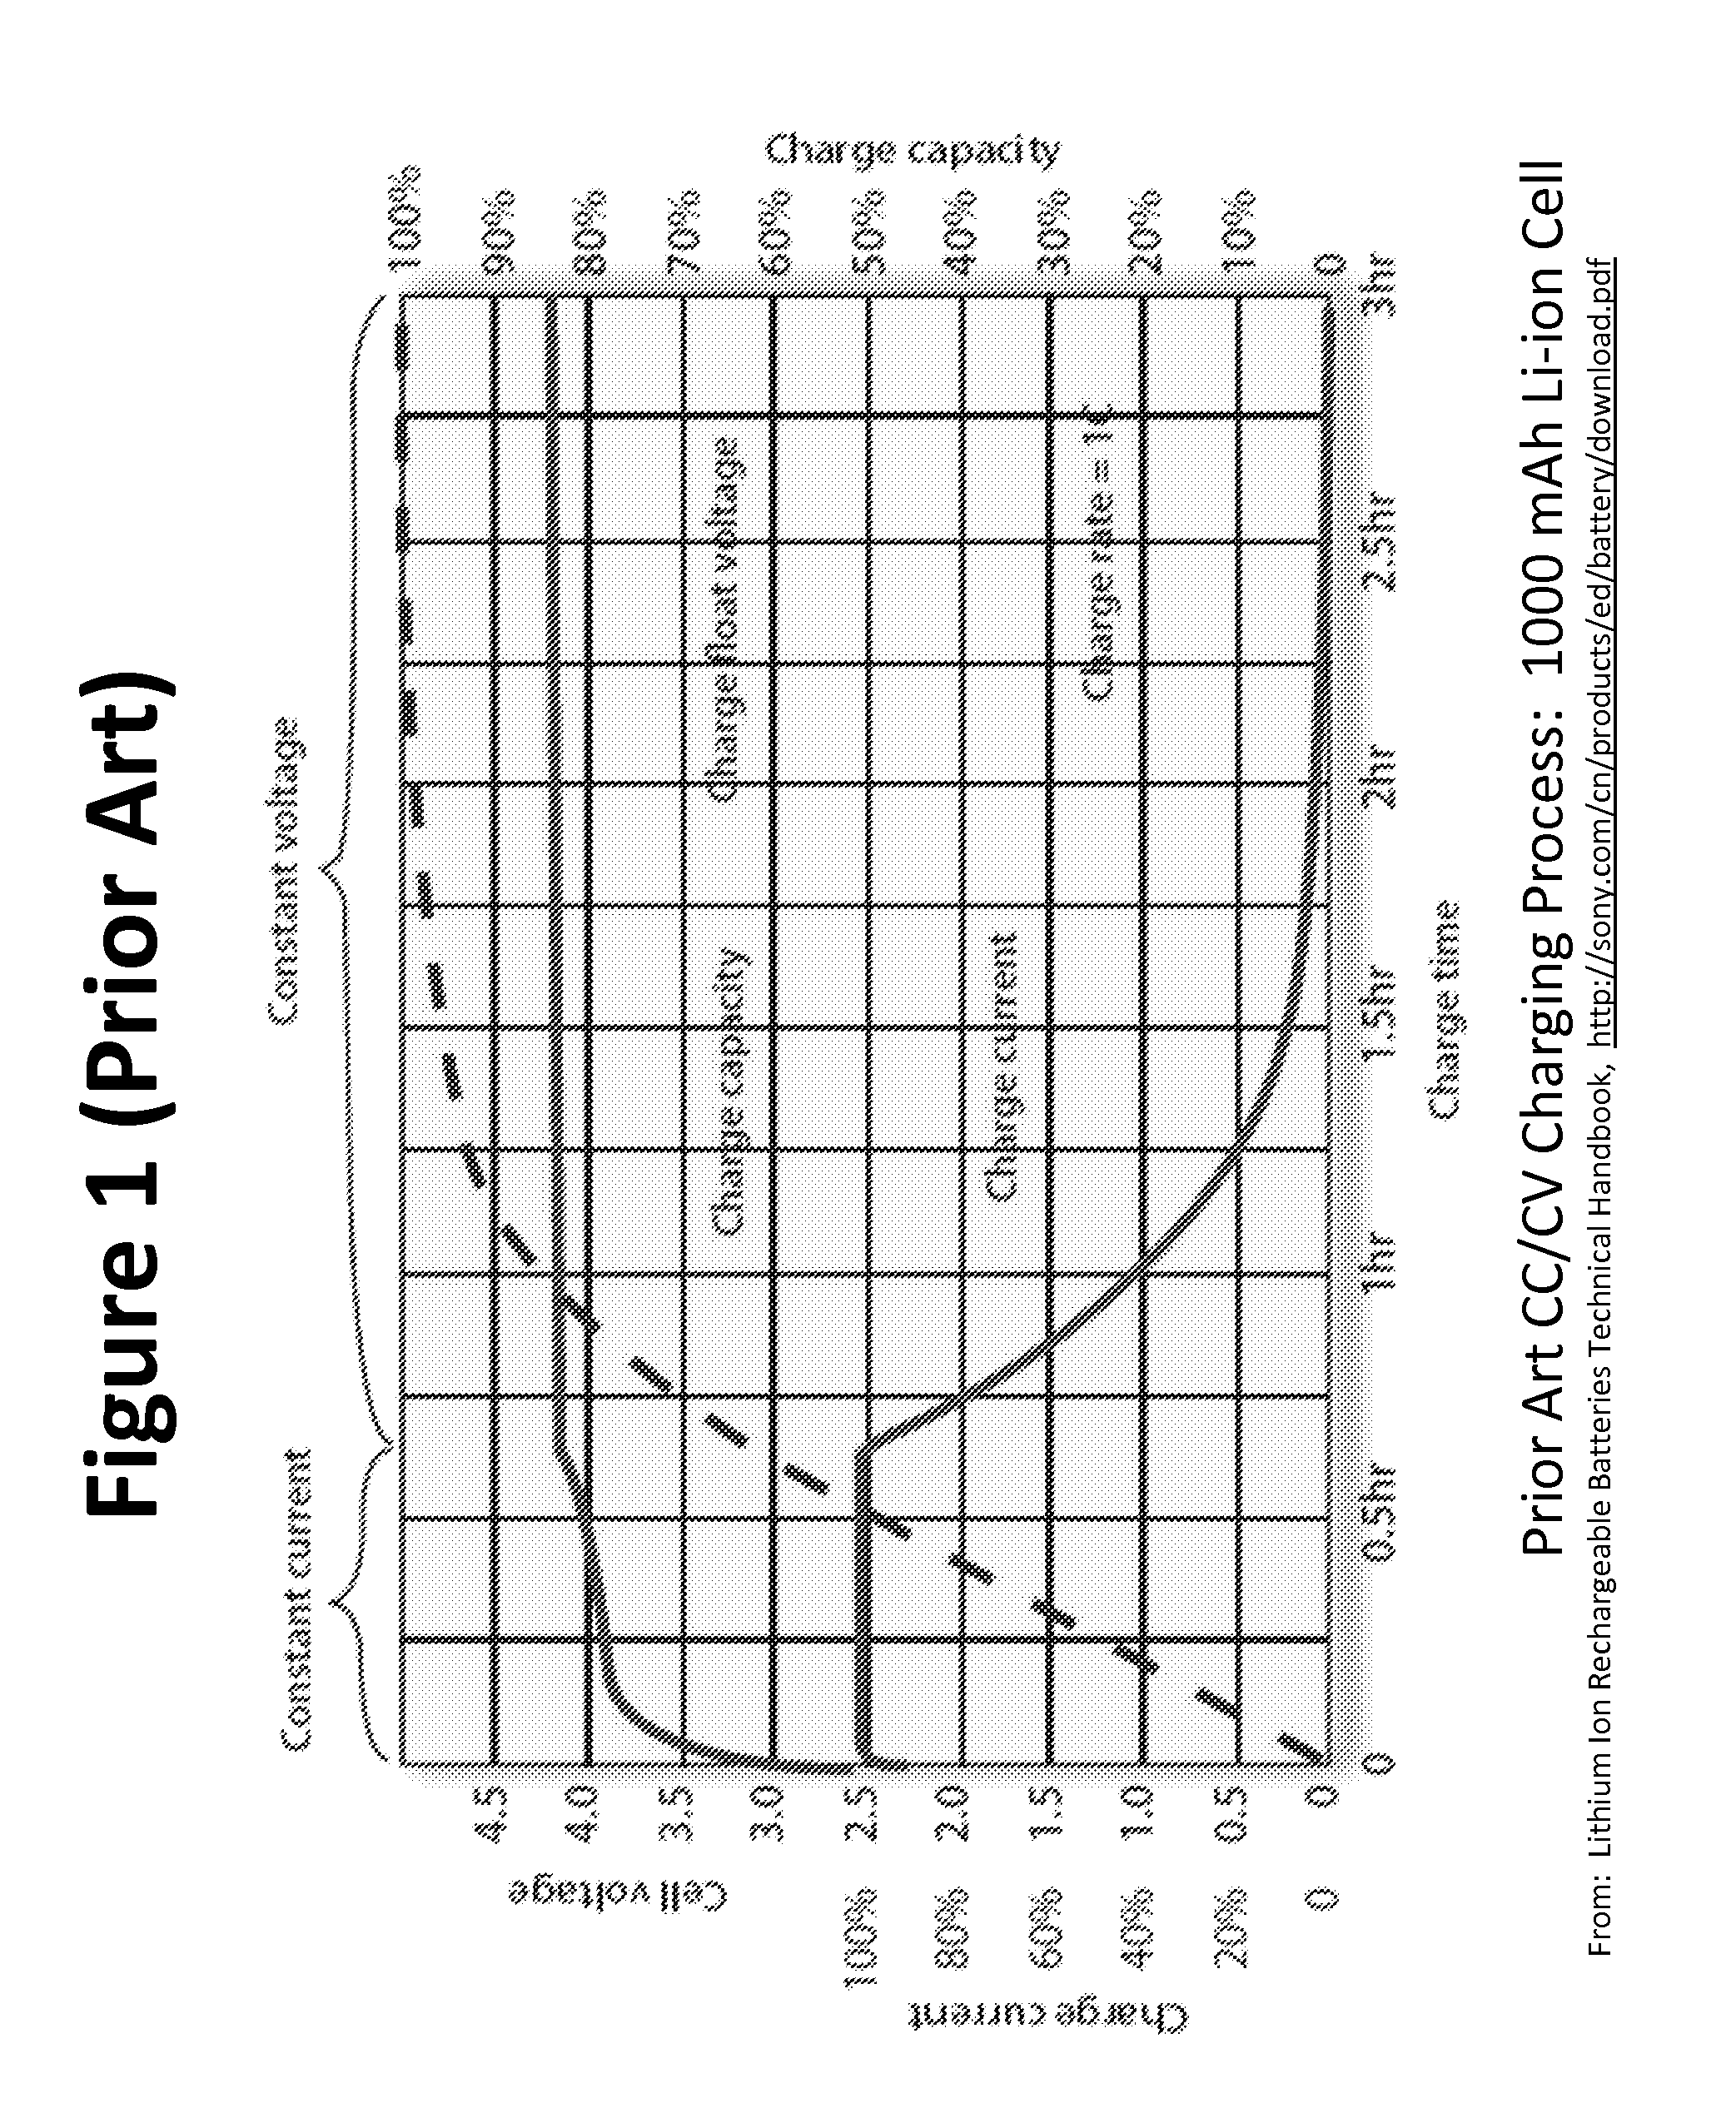 Pulse battery charger methods and systems for improved charging of lithium ion batteries